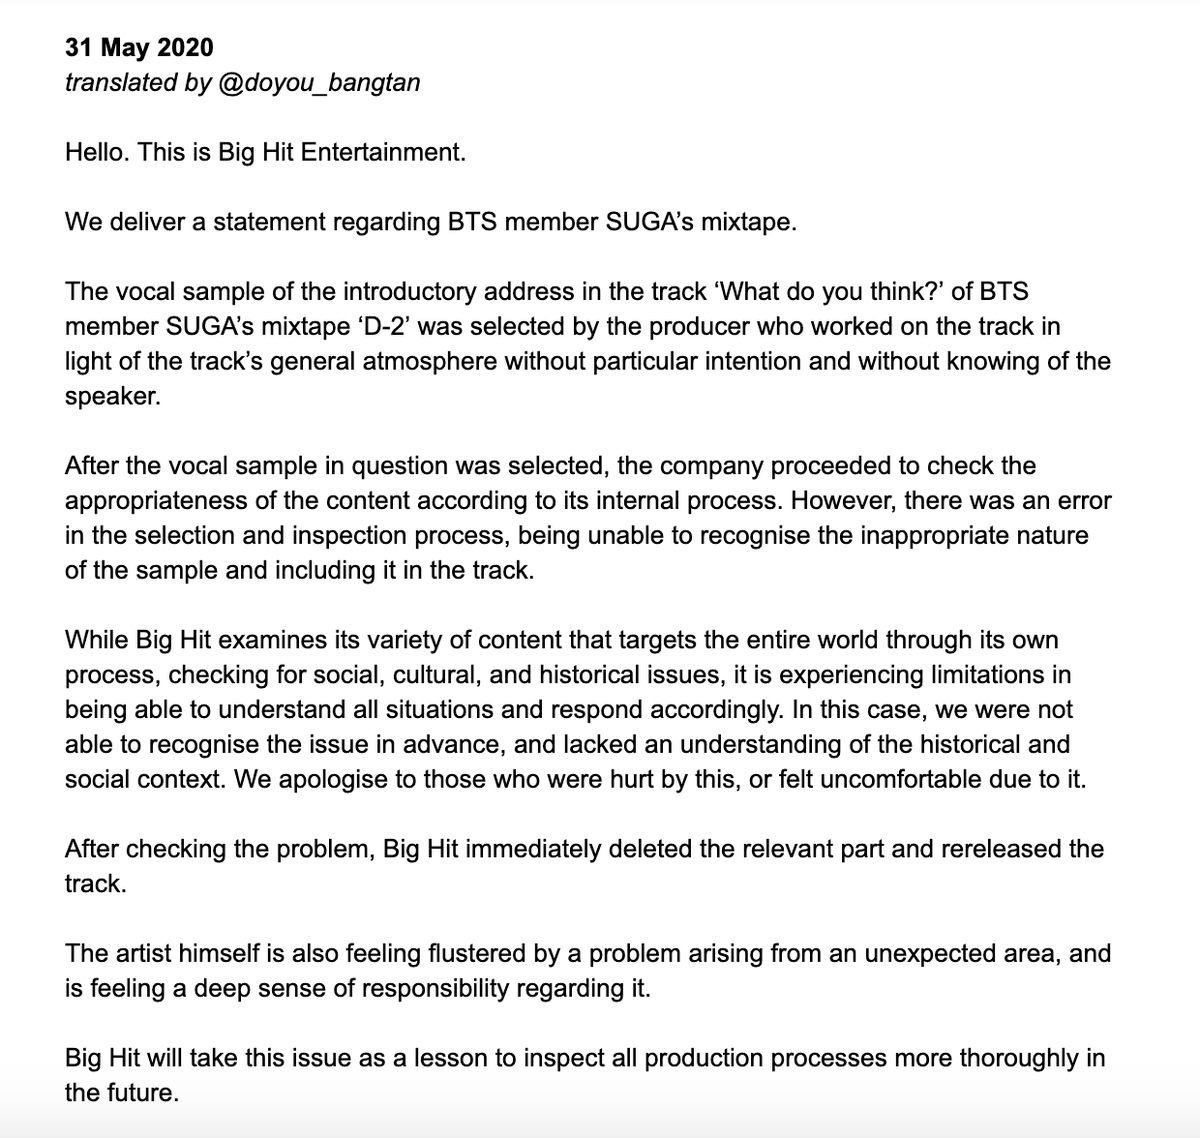 BH's official statement